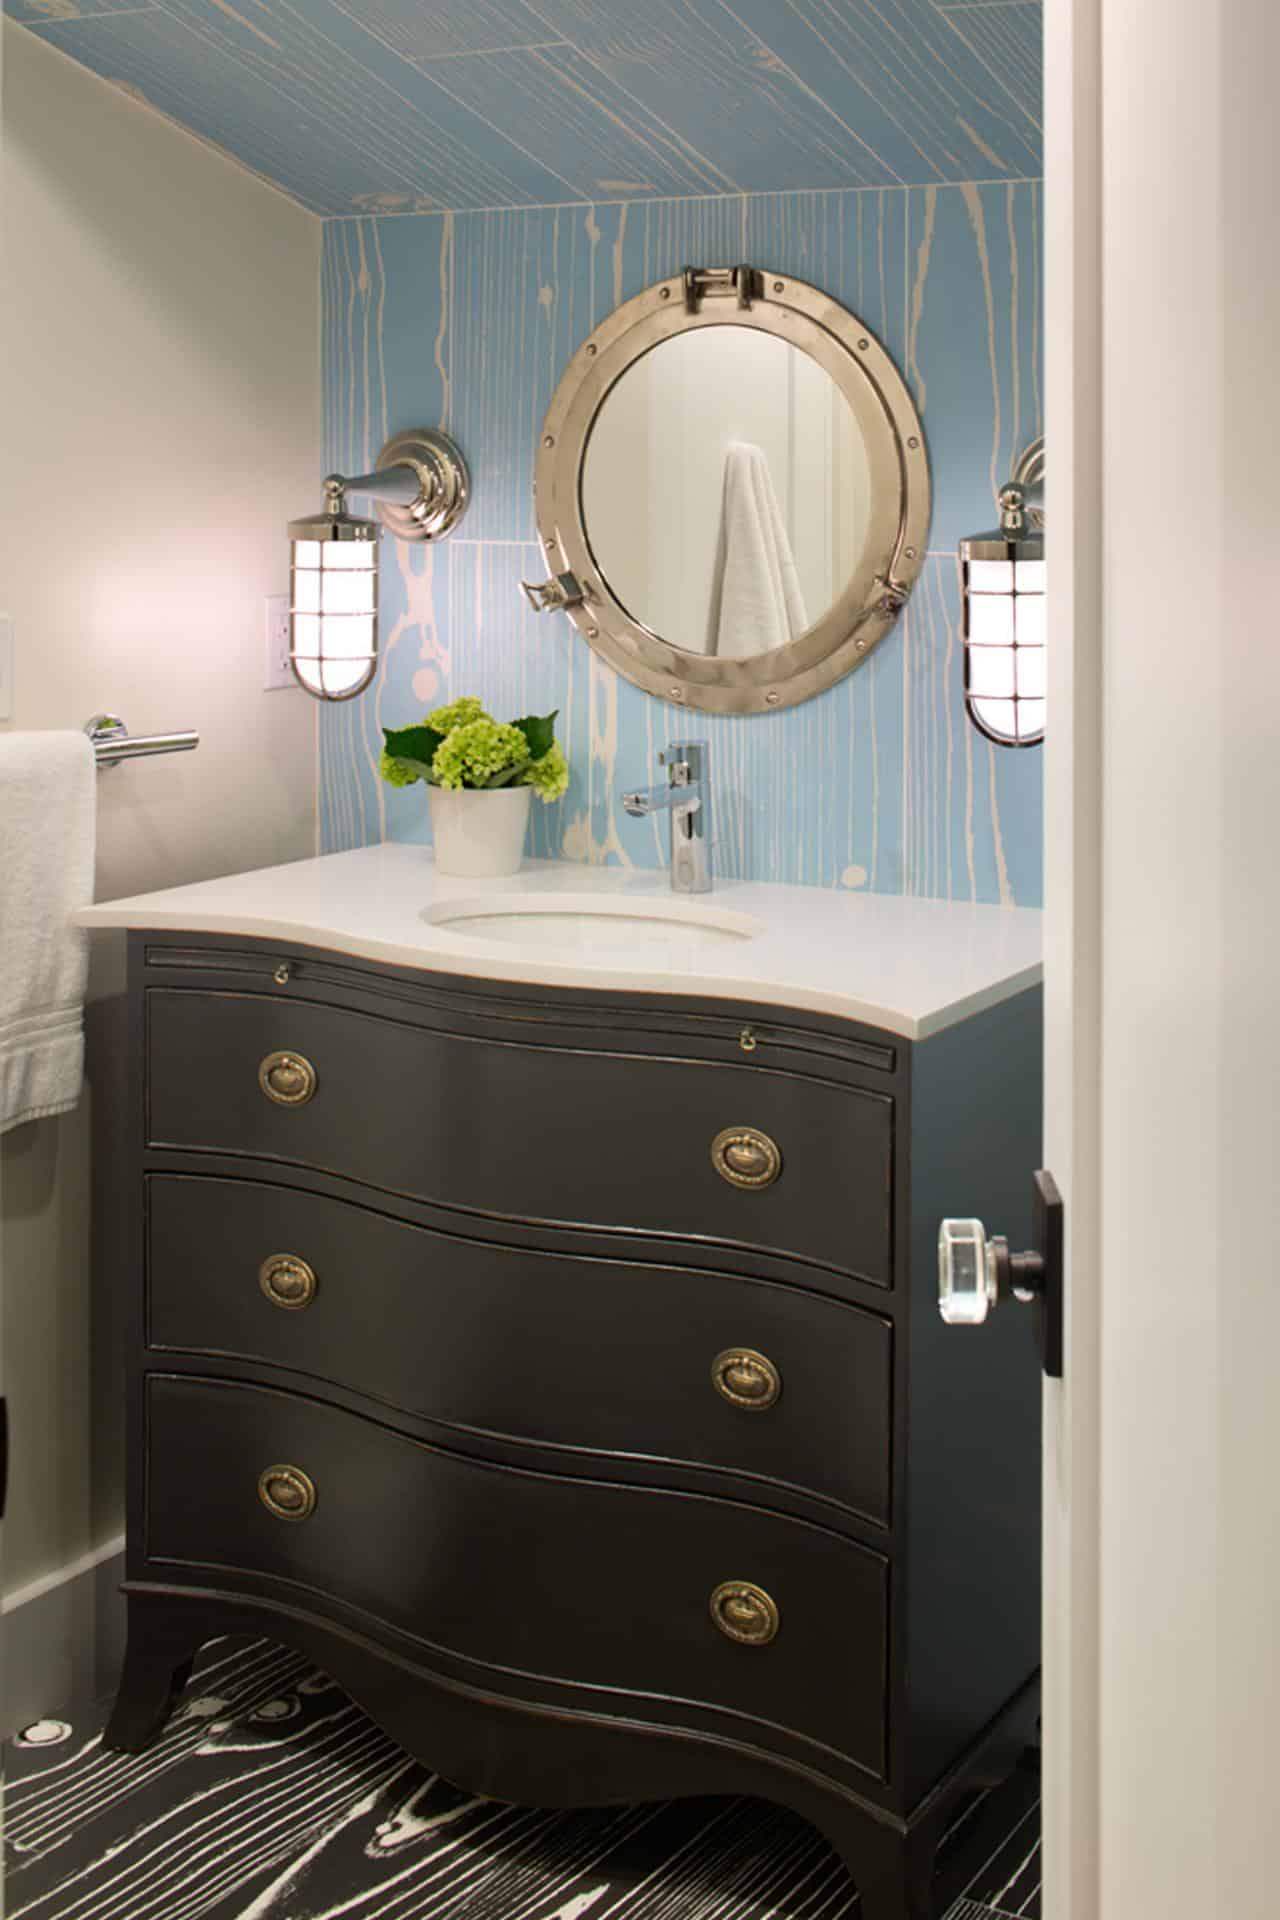 Powder room nautical touch